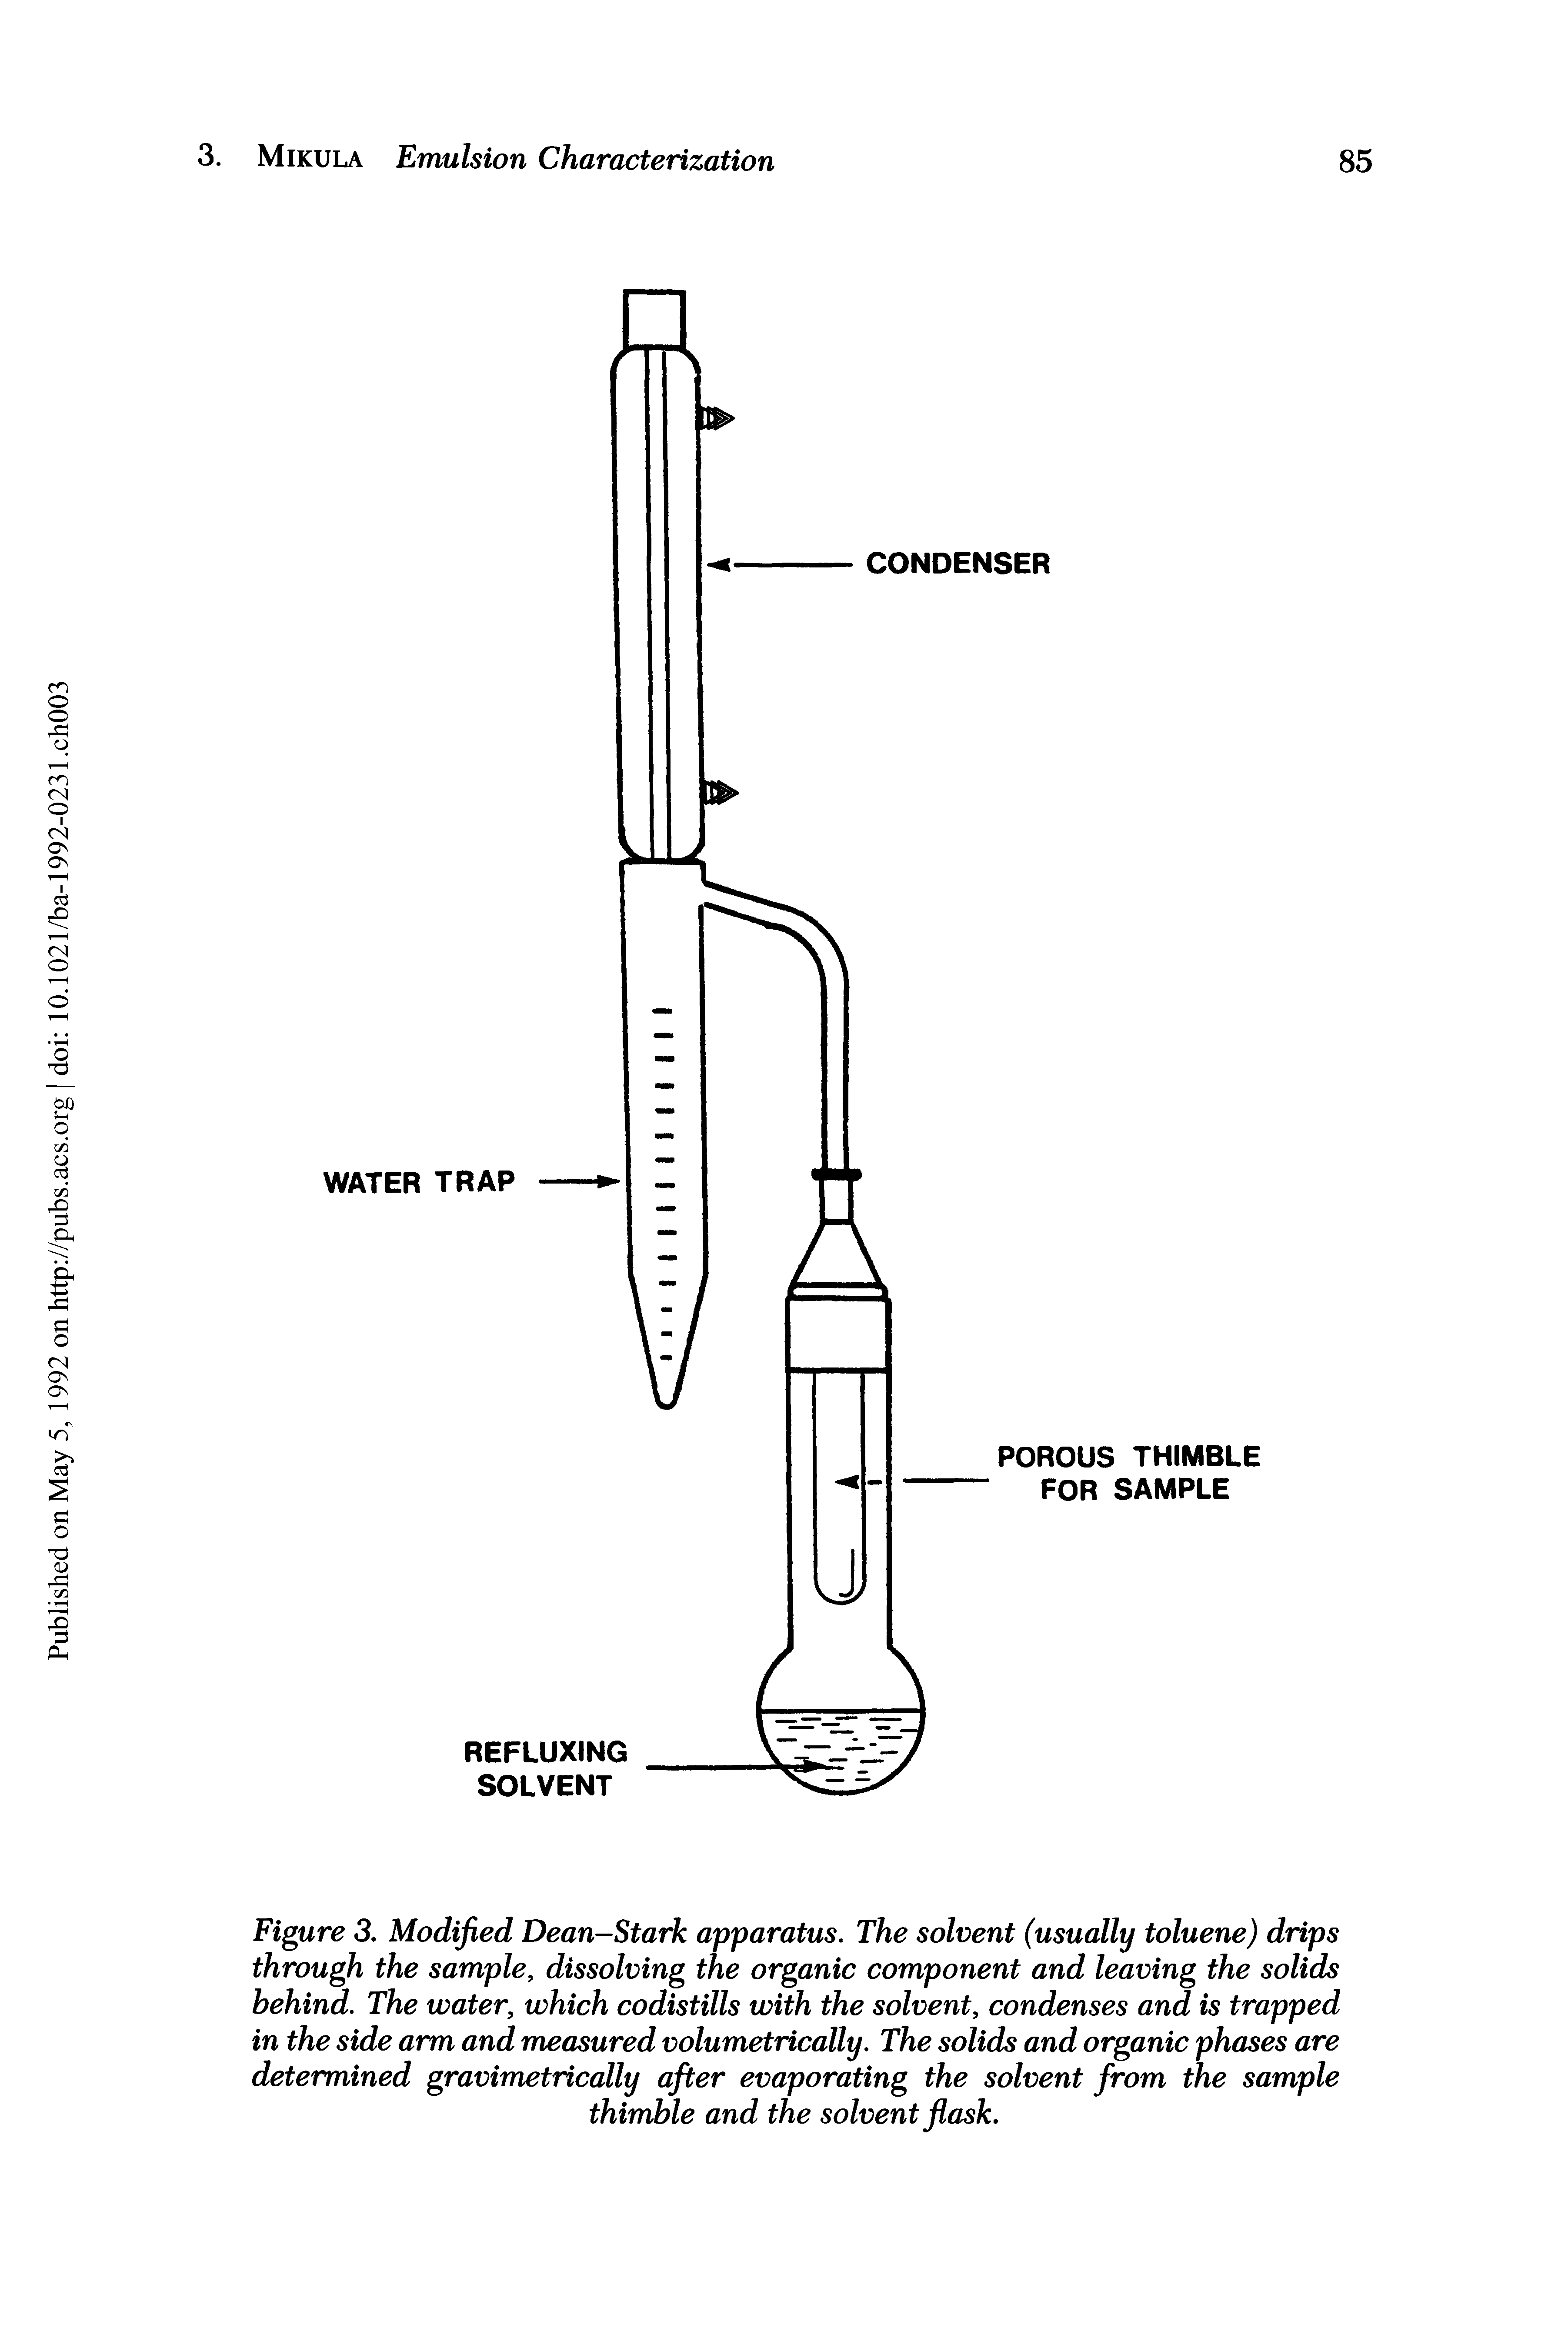 Figure 3. Modified Dean-Stark apparatus. The solvent (usually toluene) drips through the sample, dissolving the organic component and leaving the solids behind. The water, which codistills with the solvent, condenses and is trapped in the side arm and measured volumetrically. The solids and organic phases are determined gravimetrically after evaporating the solvent from the sample thimble and the solvent flask.